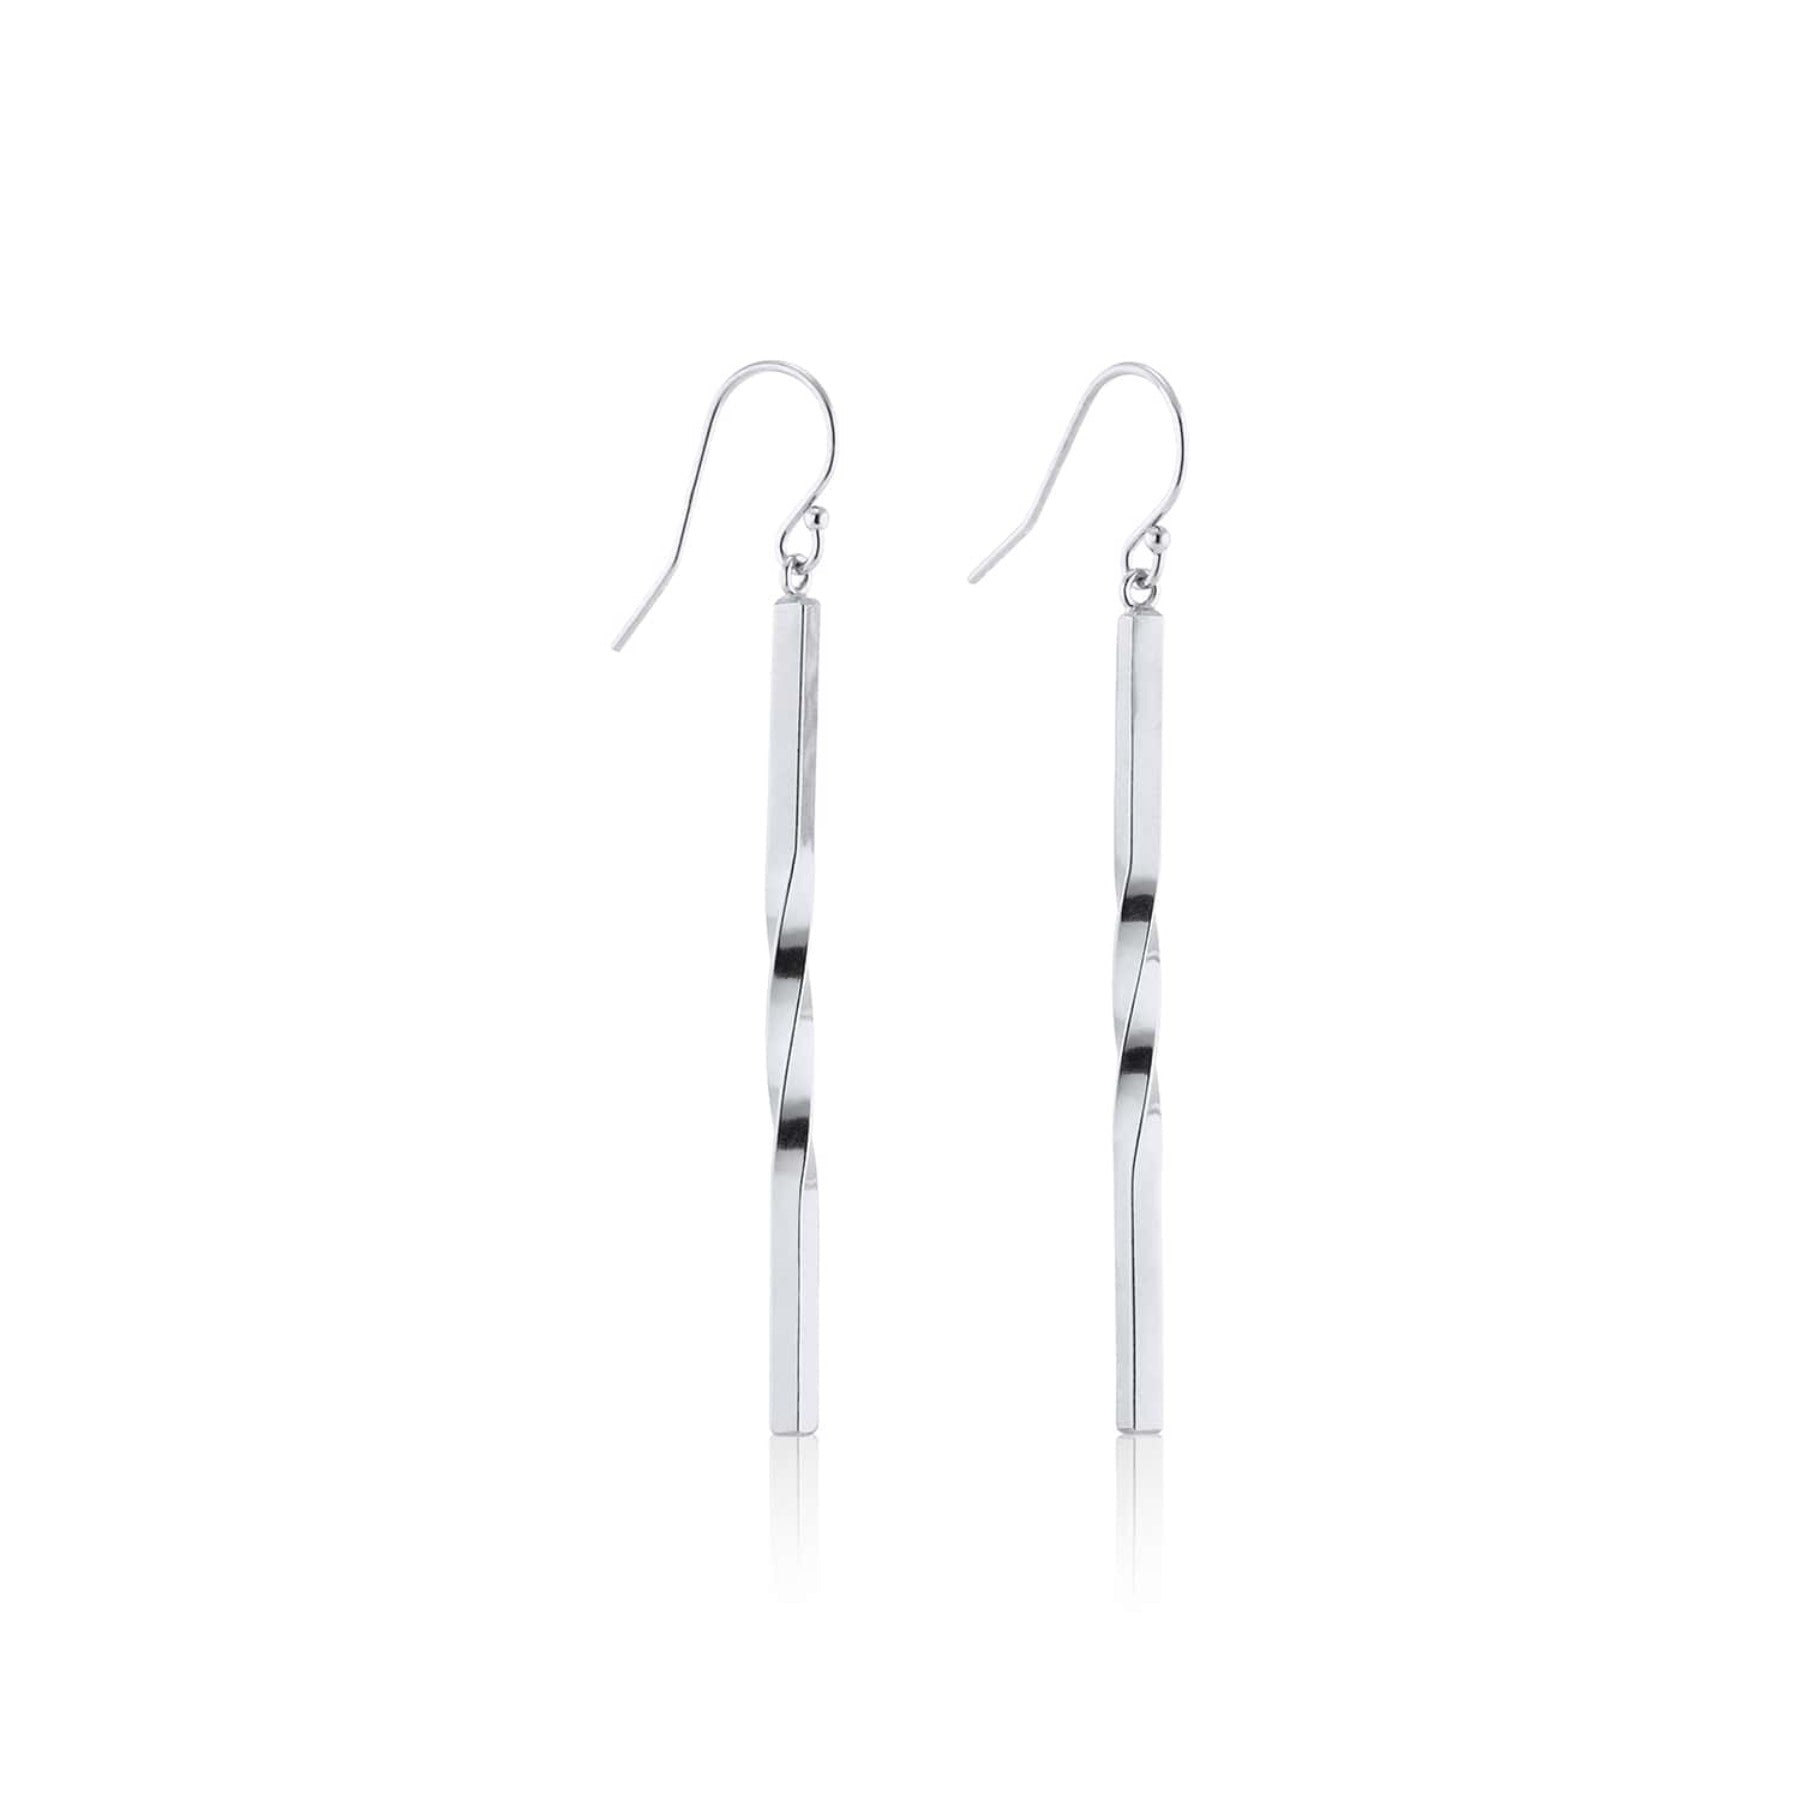 Minimalist vertical bar-shaped earrings with a single twist in the center and a fish hook ear wire in sterling silver.